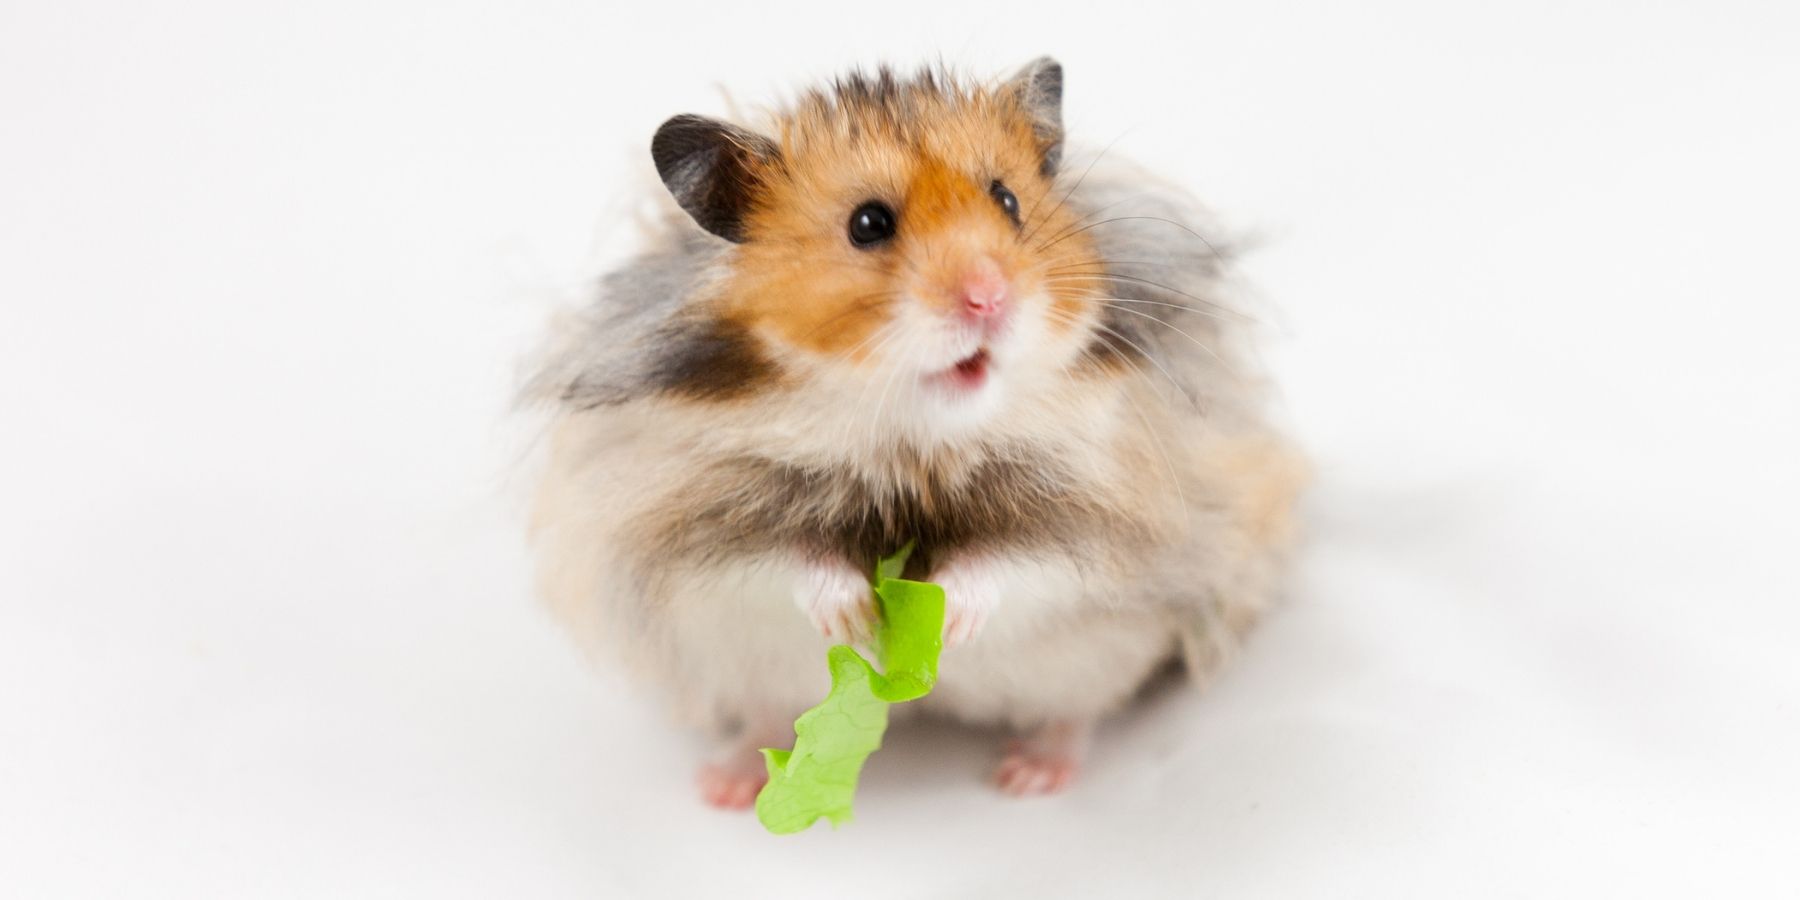 What Foods You Should Not Feed Hamsters?